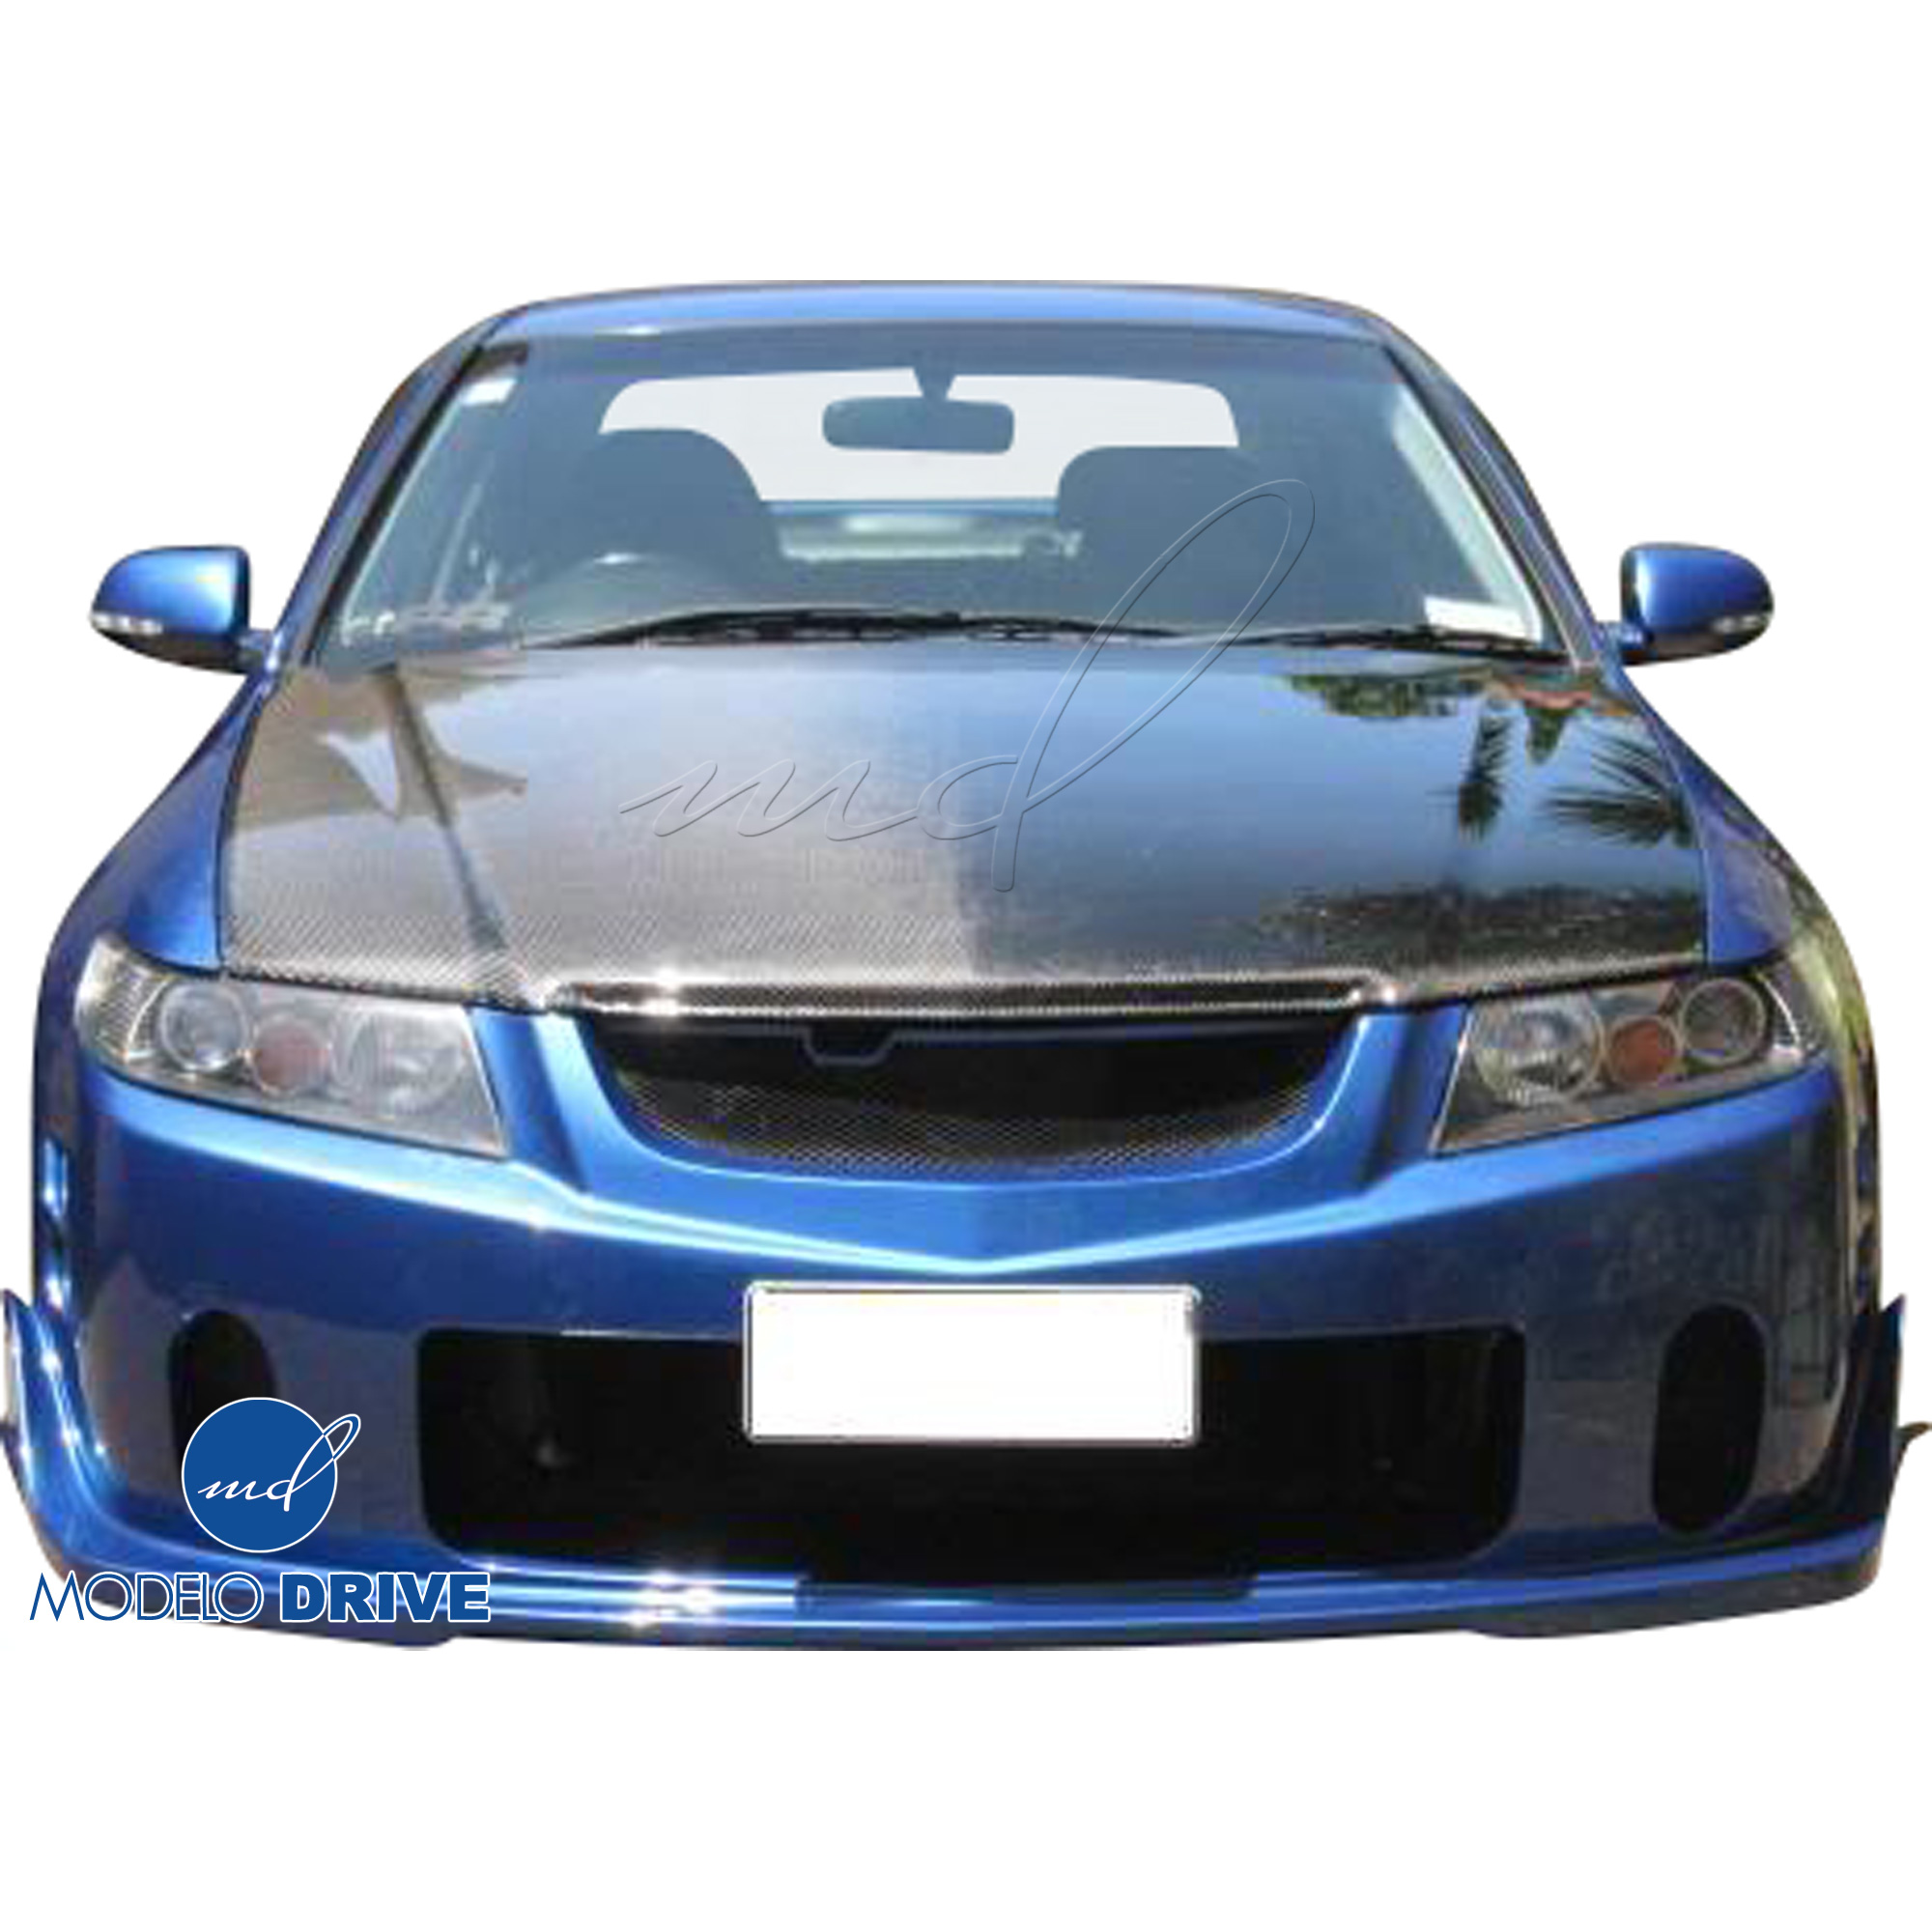 ModeloDrive FRP BC2 Front Bumper > Acura TSX CL9 2004-2008 - Image 15